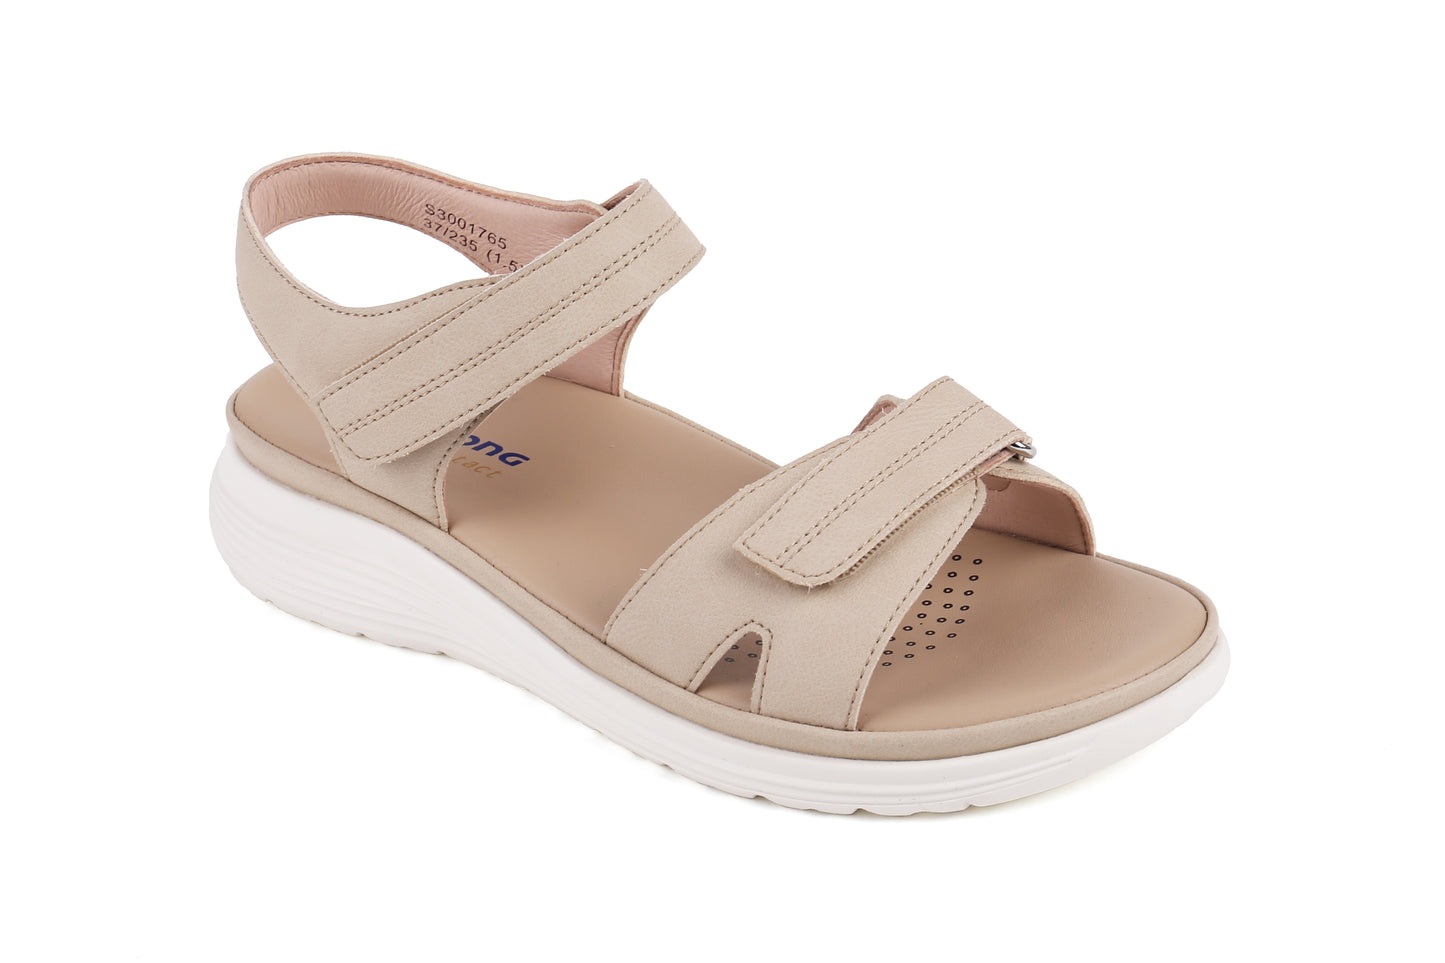 DR.KONG WOMEN TOTAL CONTACT SANDALS DK-S3001765-LBE(RP : $159)